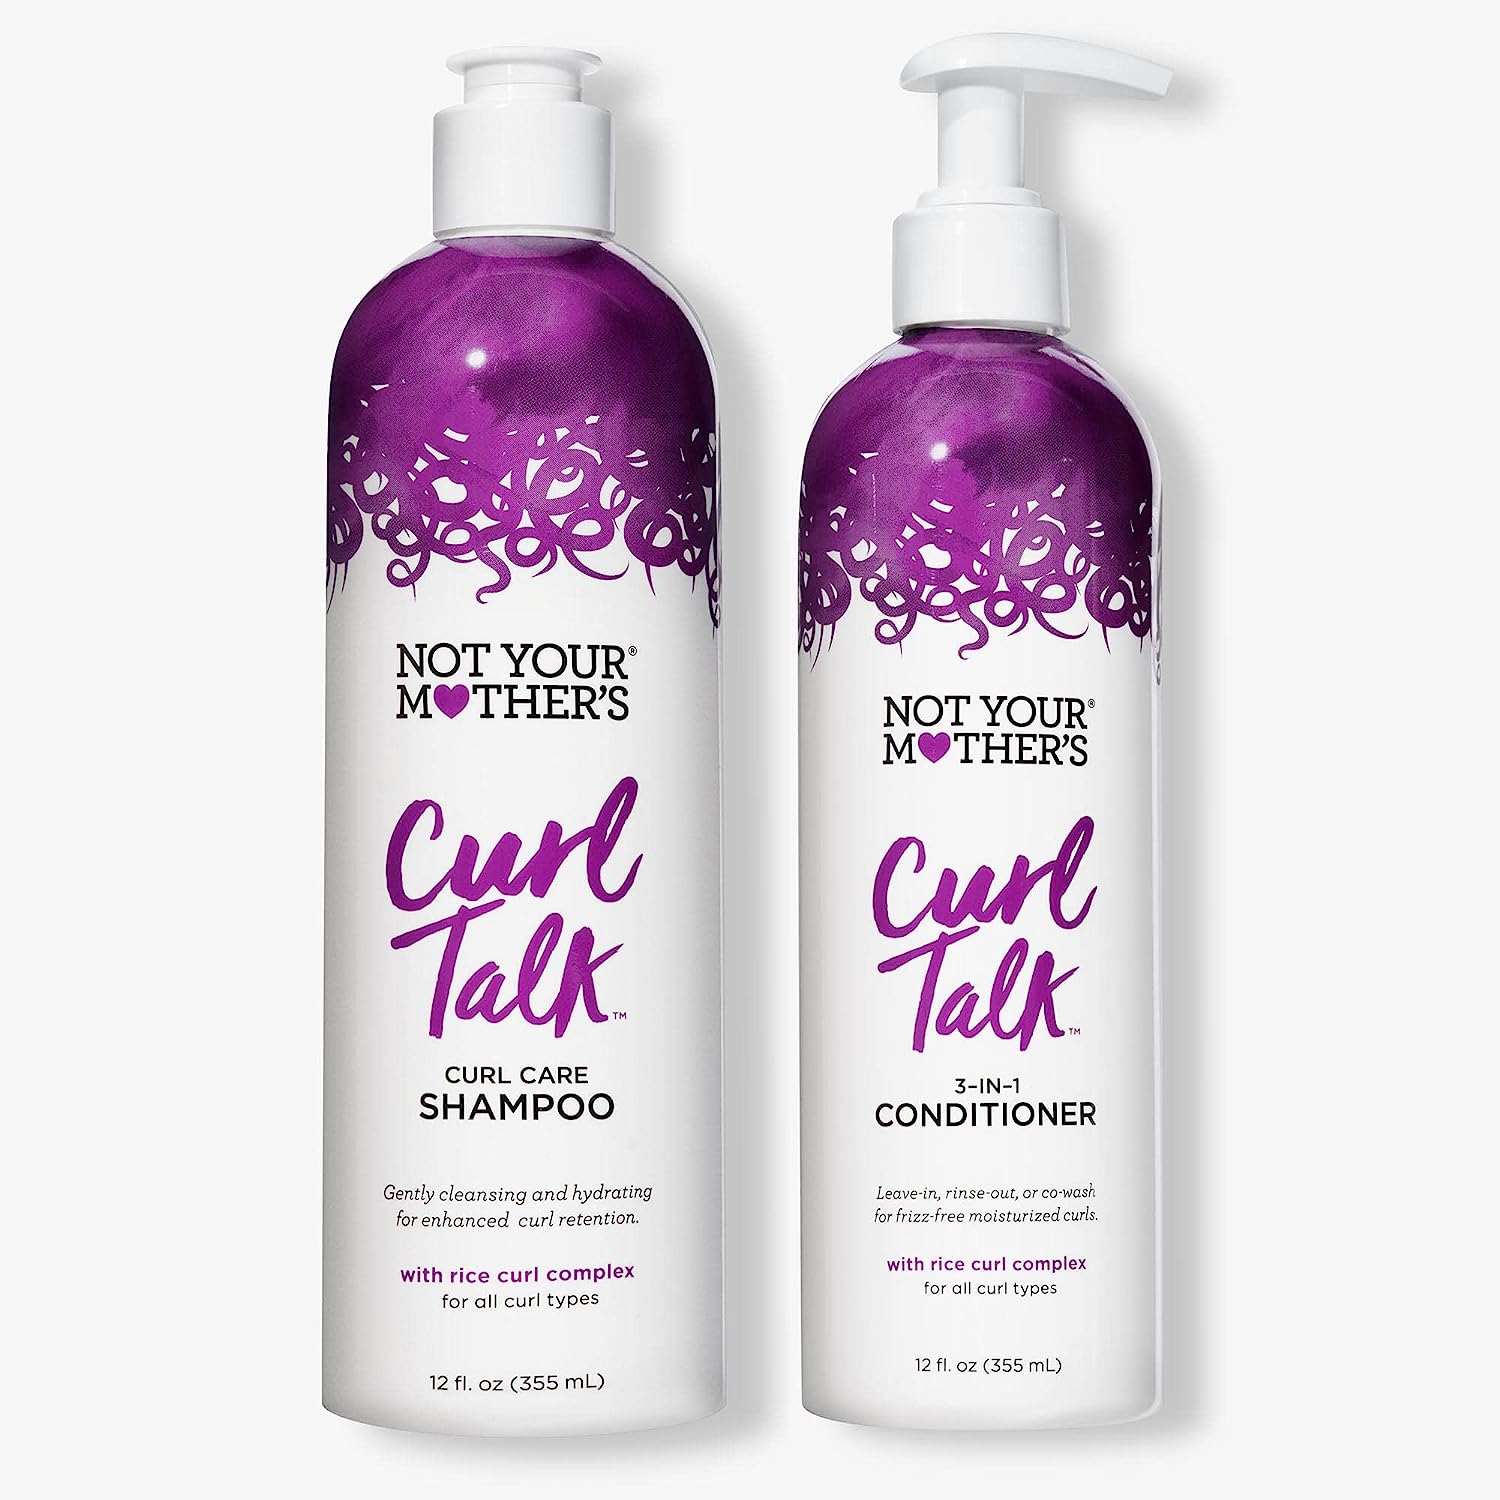 shampoo to make hair curly review